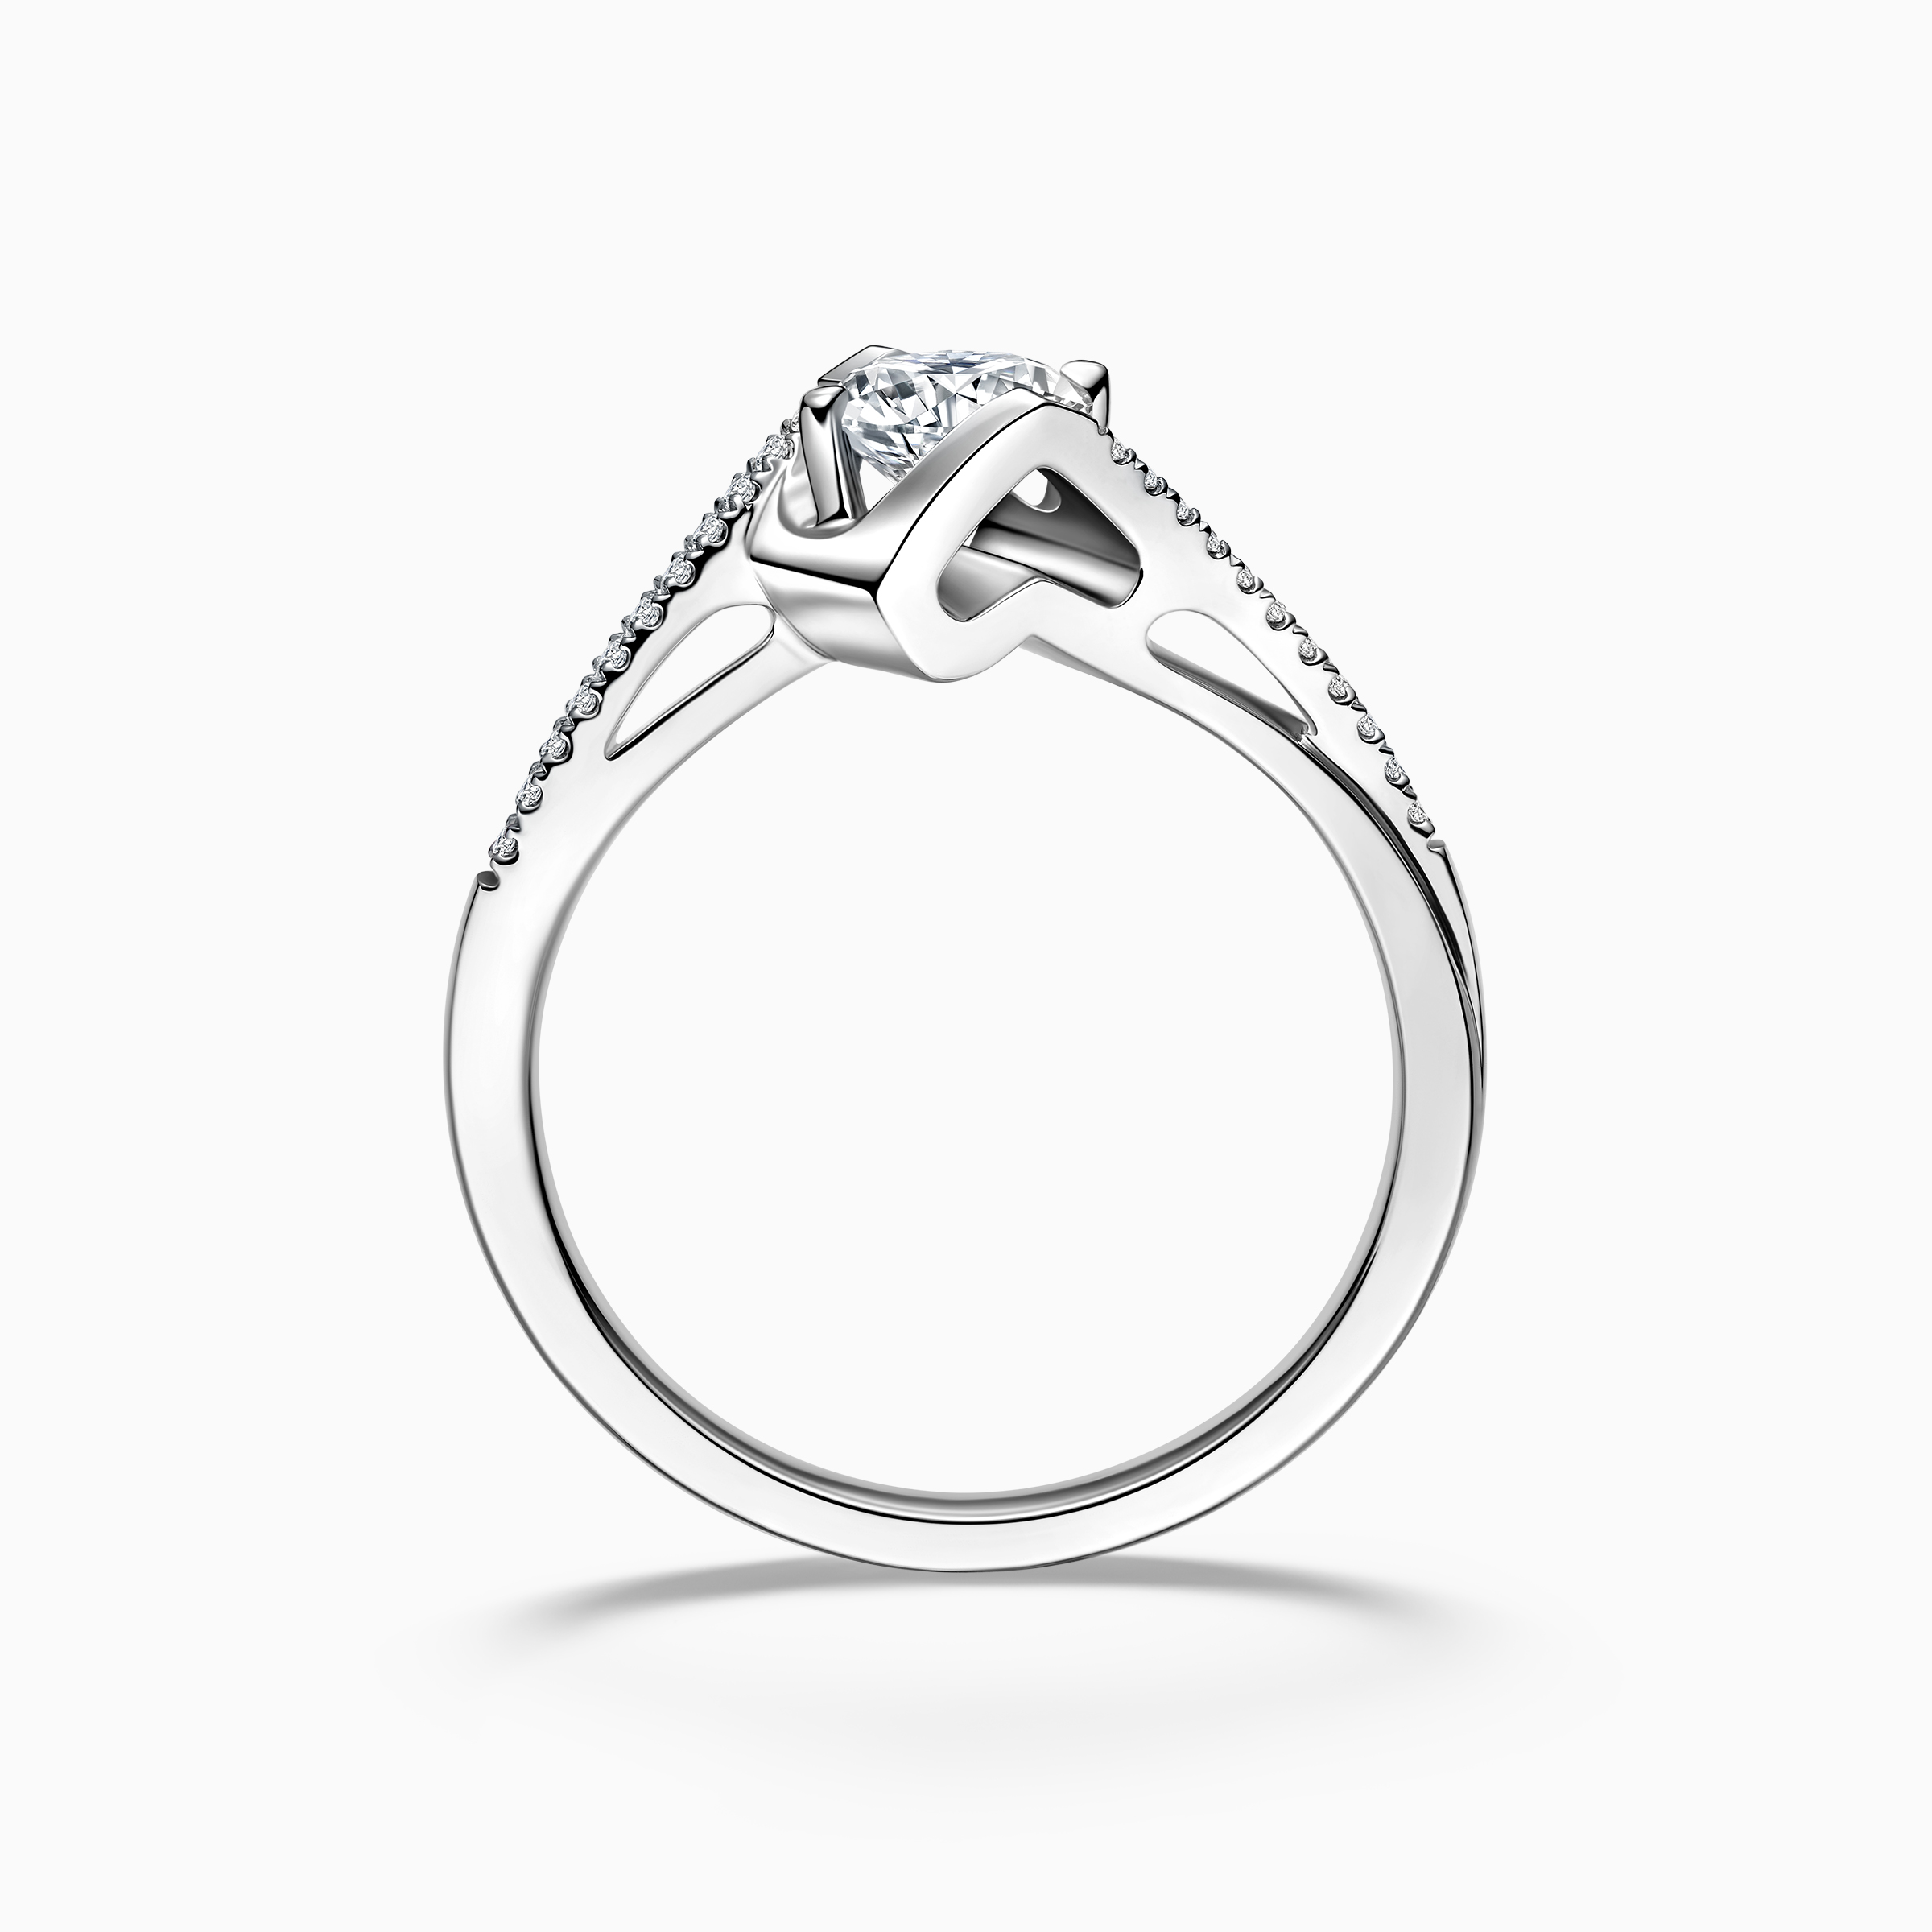 Darry Ring square round promise ring side view